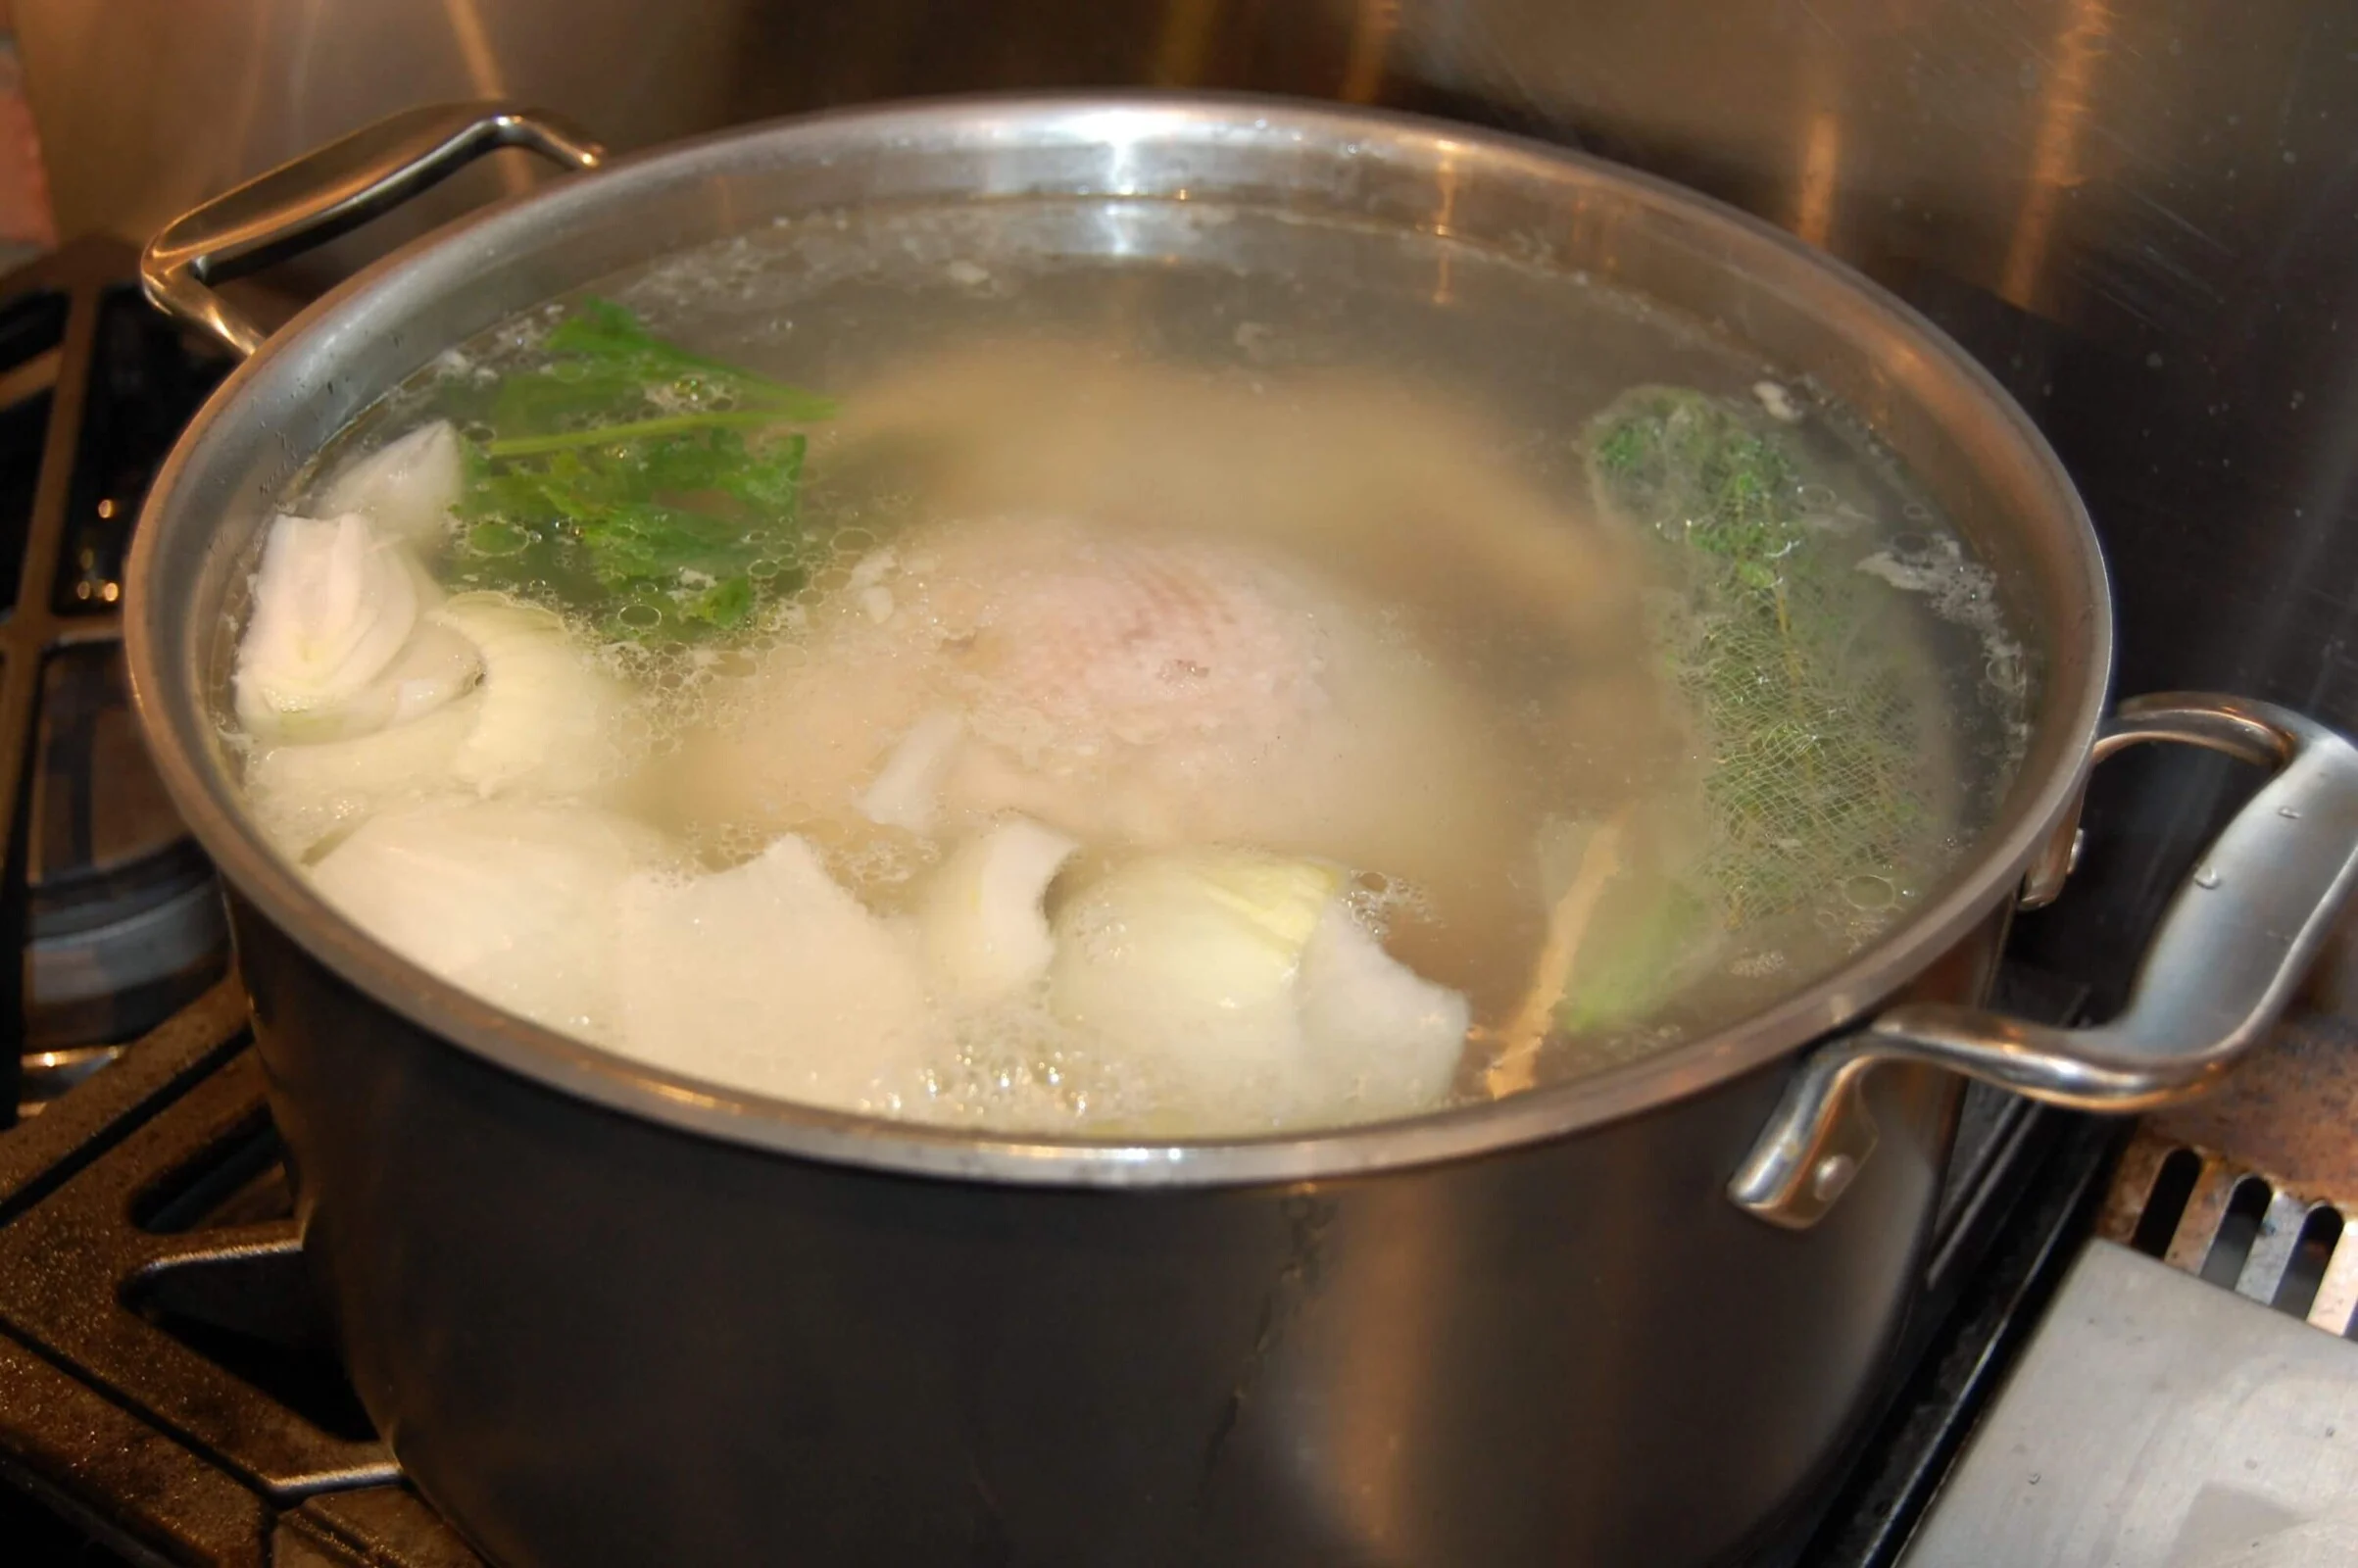 Chicken stock cooking in the pot on stove